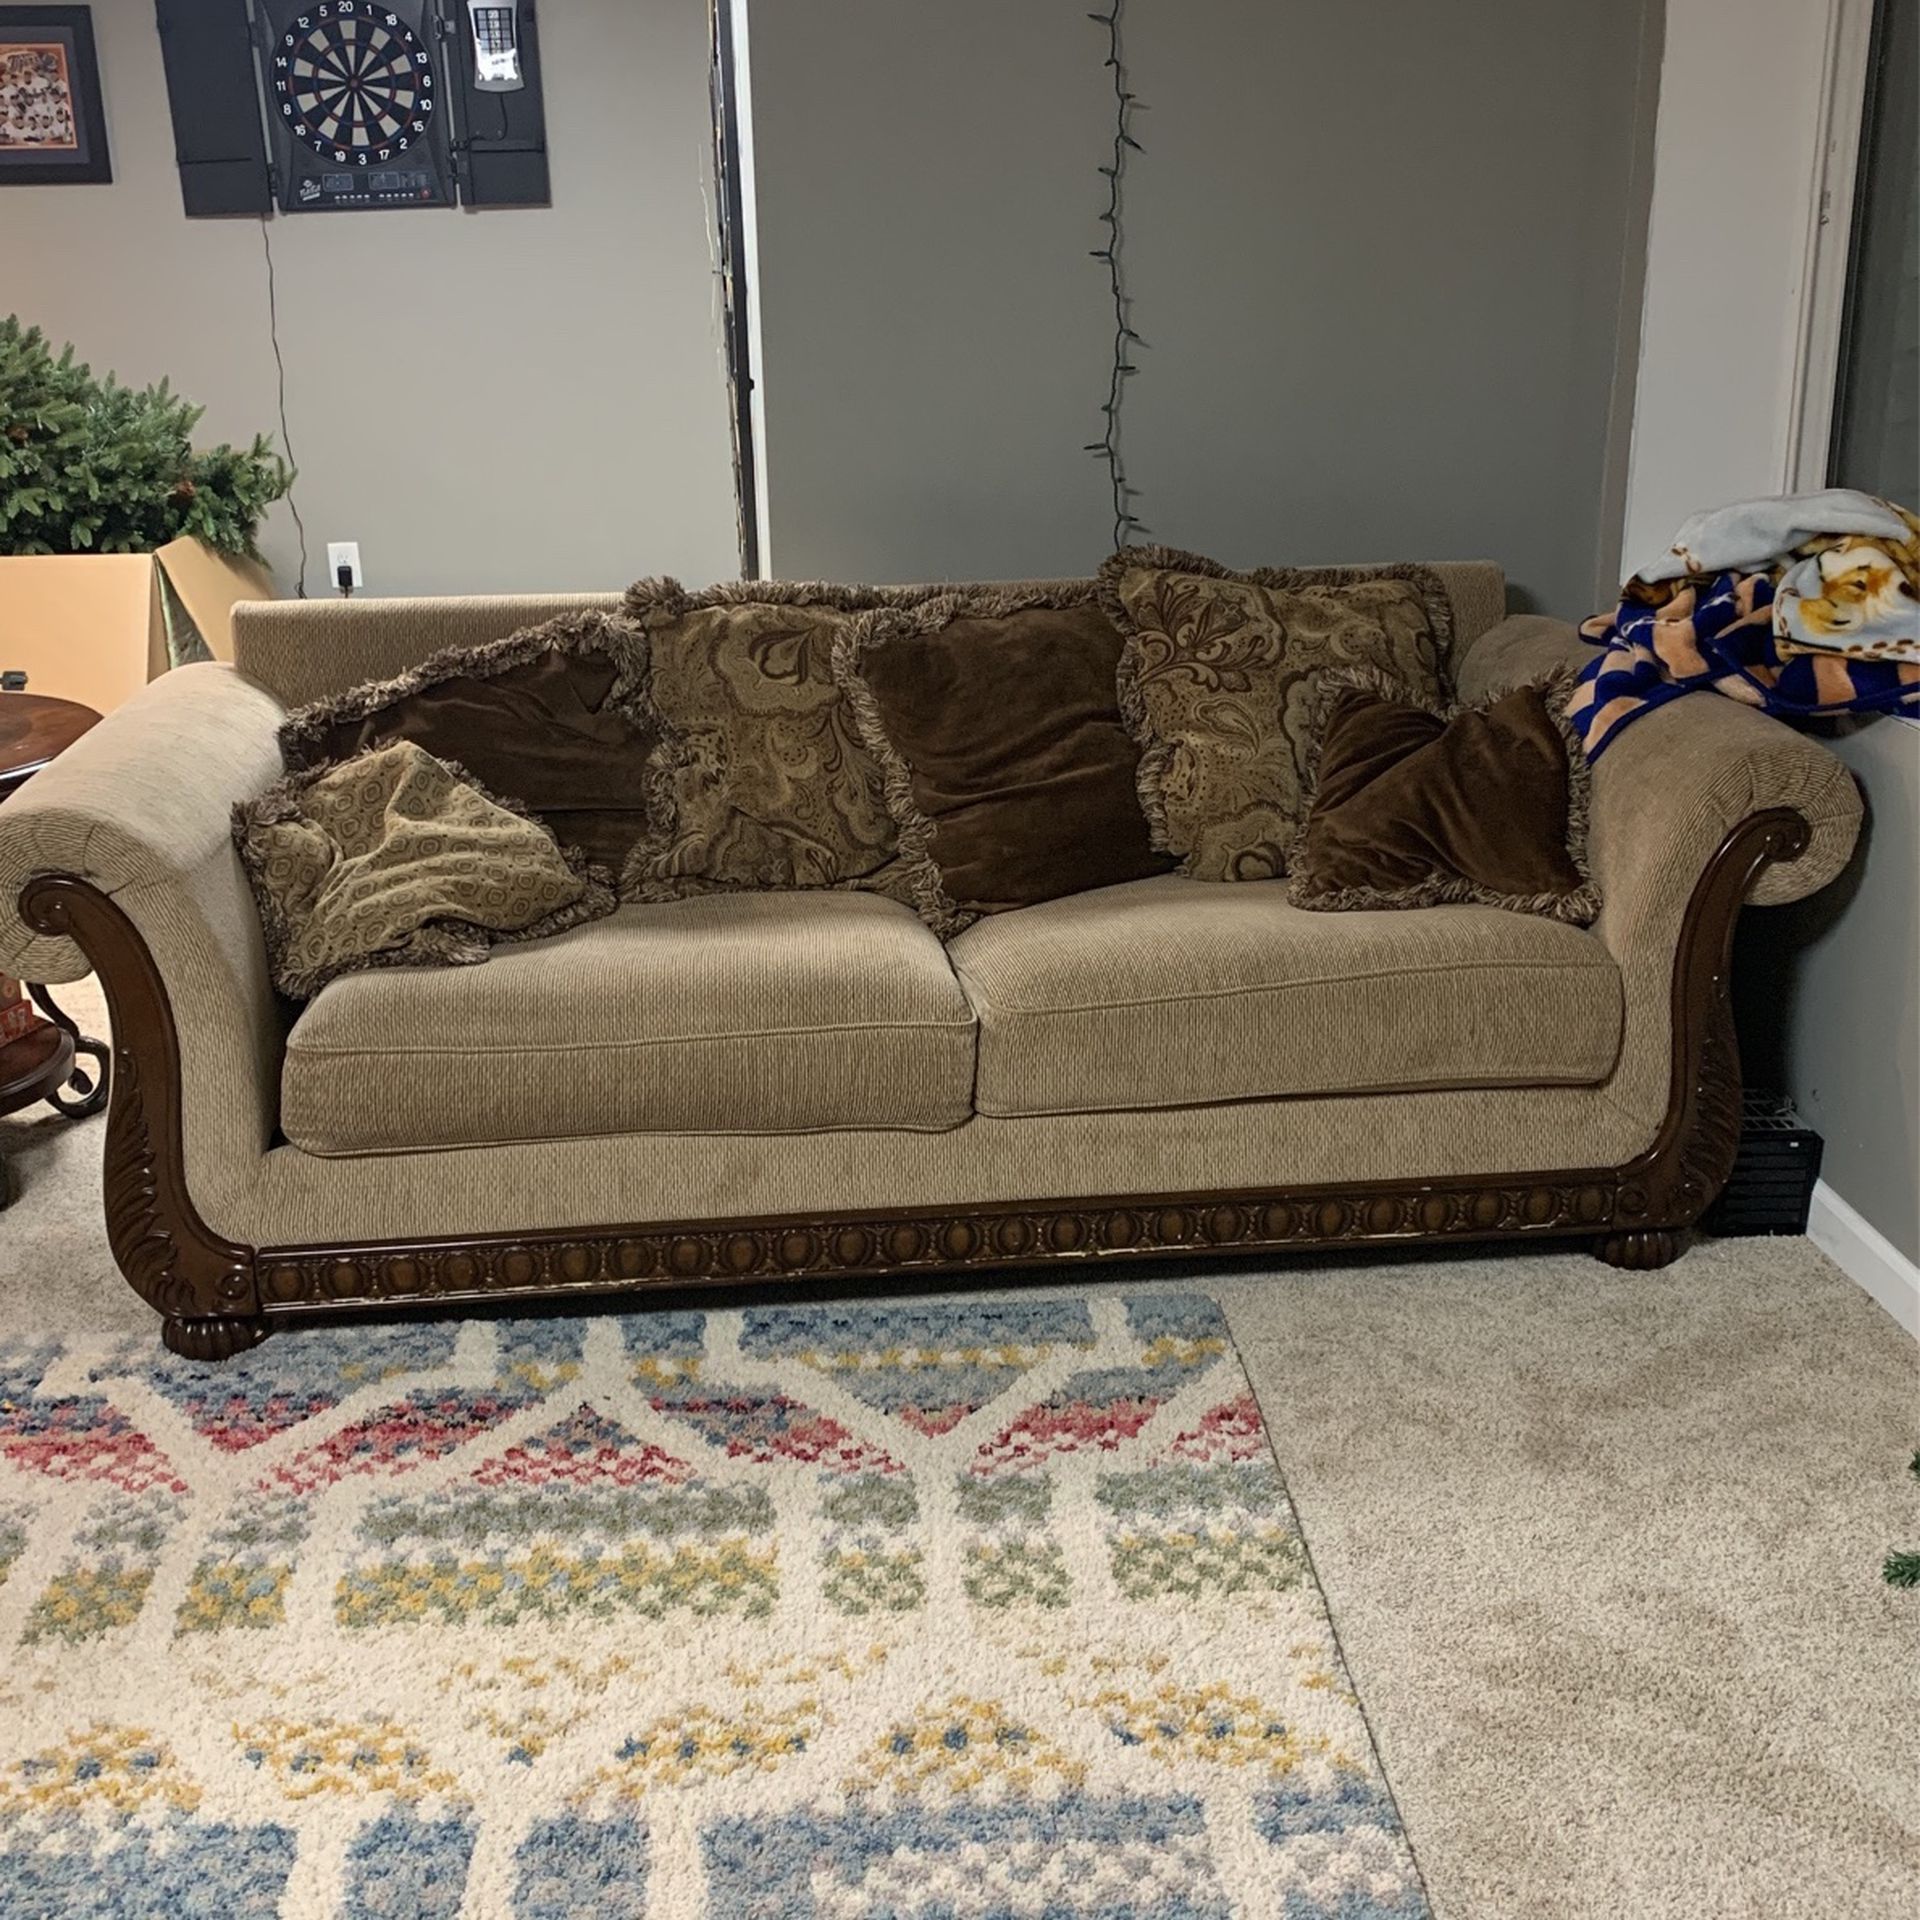 2 Couches And Middle Table And 2 End Tables